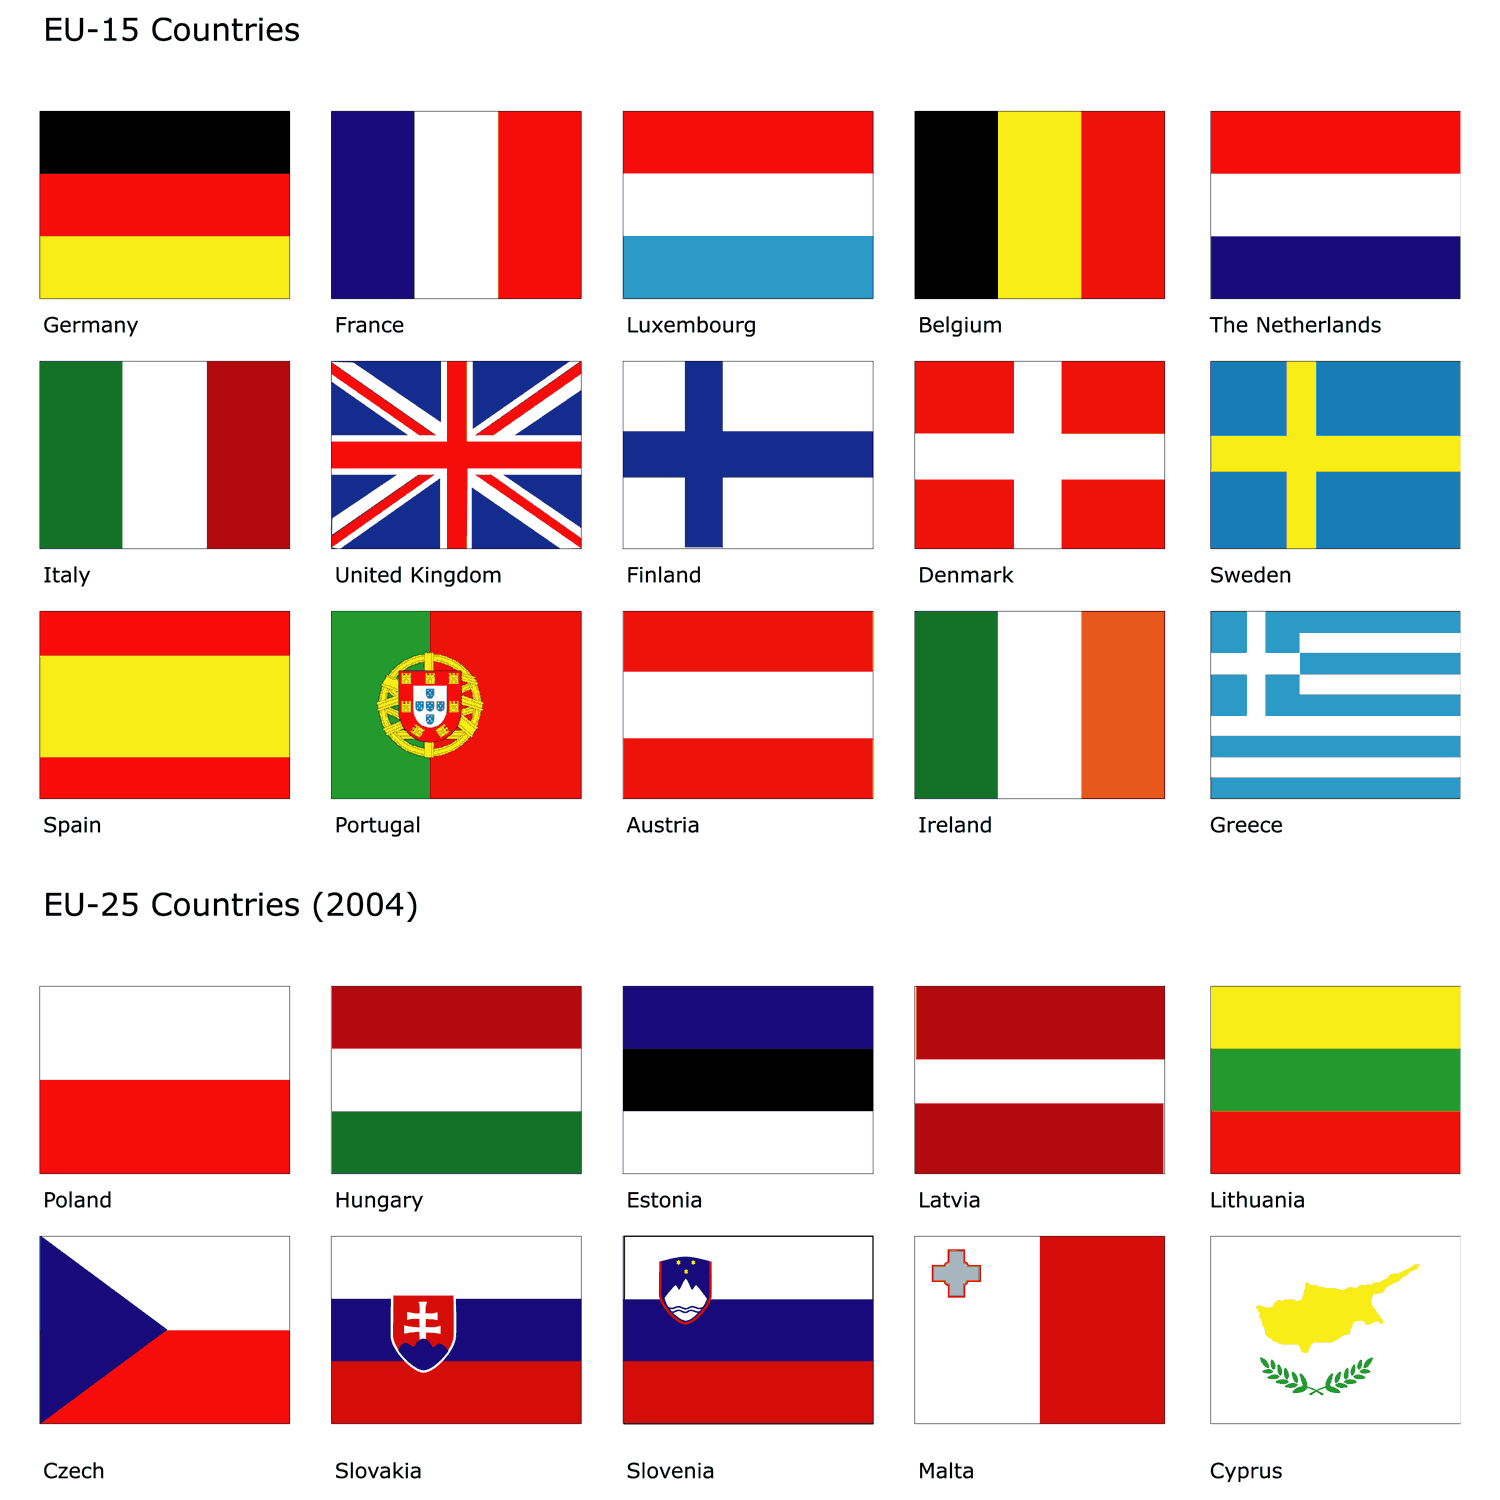 Flags Of The World - ClipArt Best